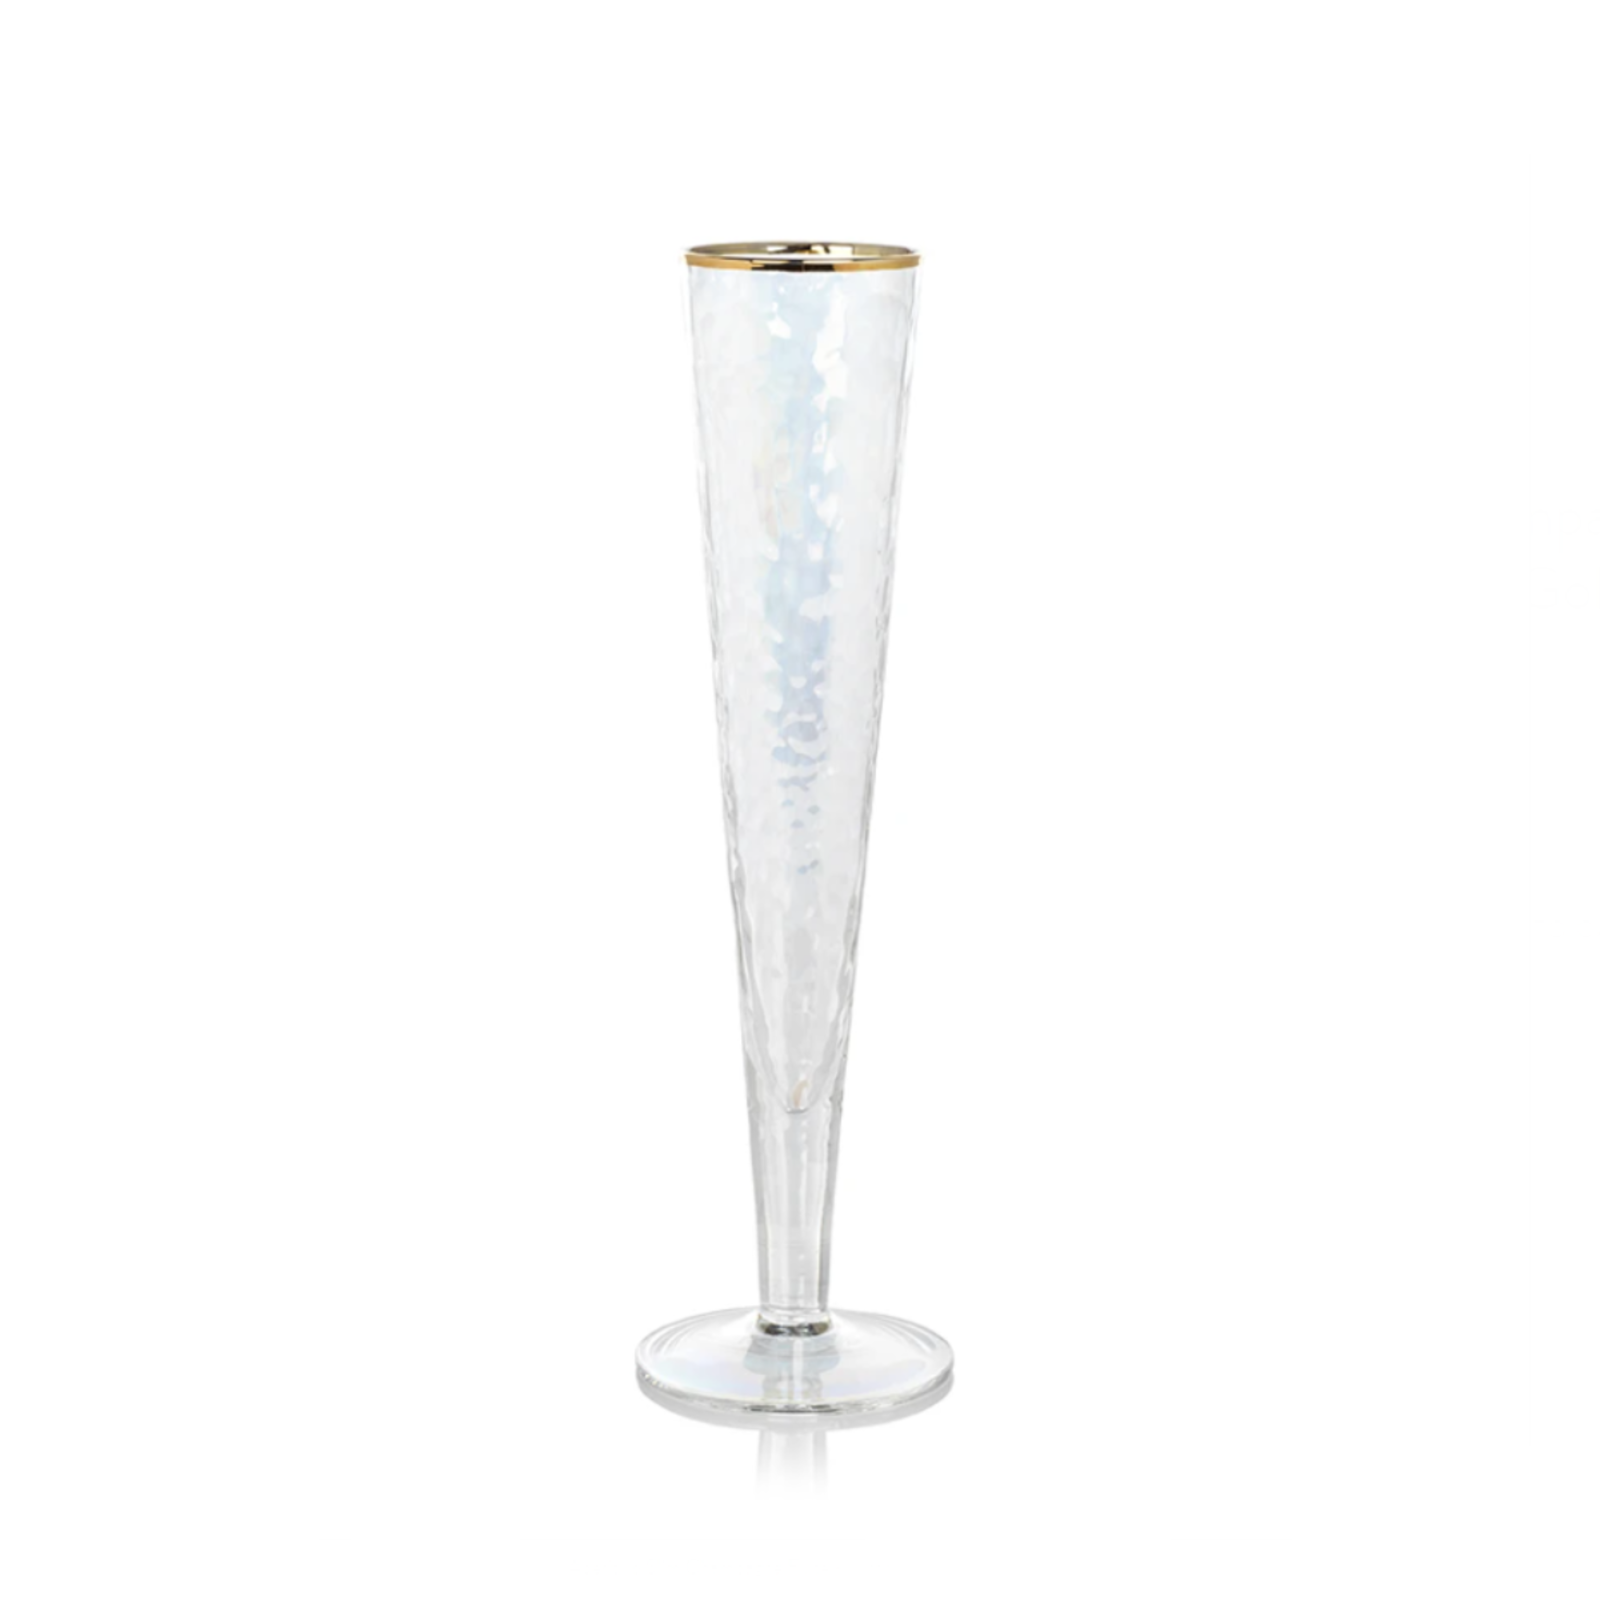 Zodax Champagne Flute Luster with Gold Rim CH-5612 loading=